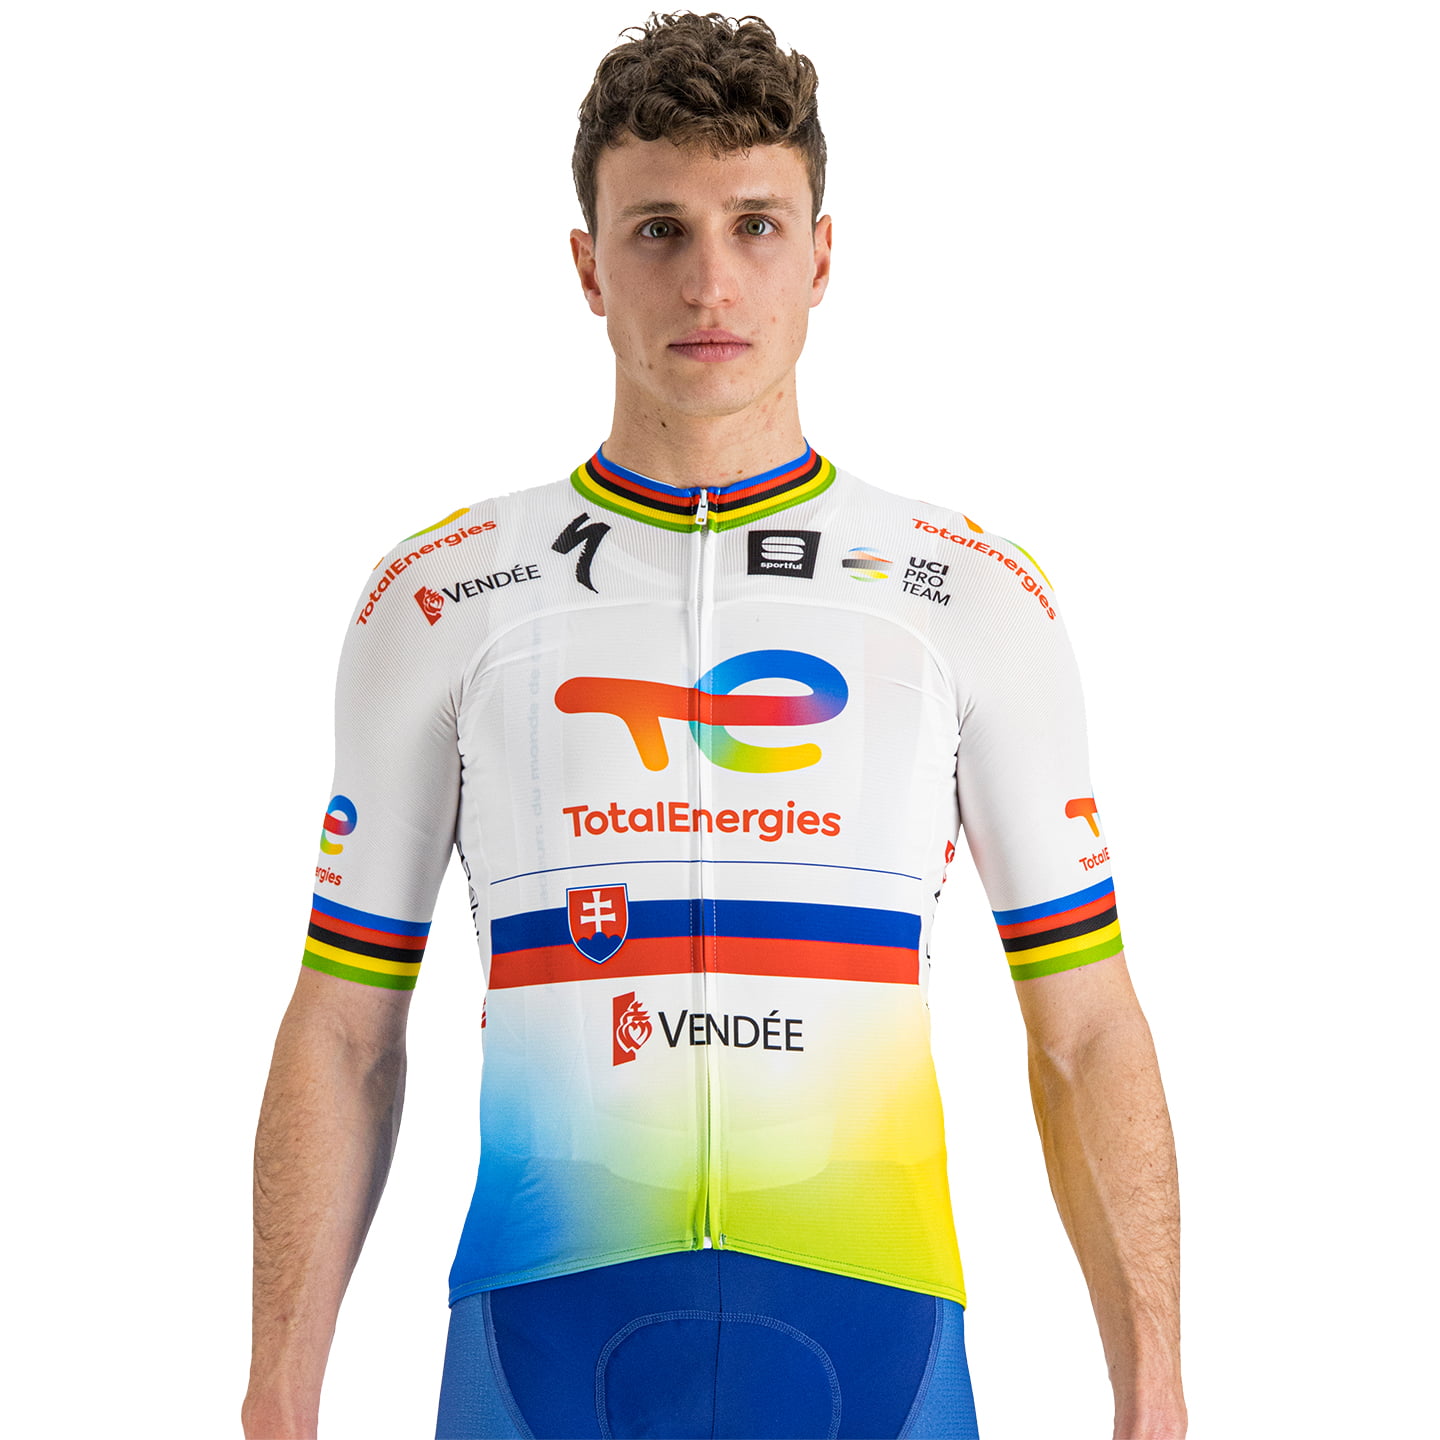 TOTALENERGIES Short Sleeve Ex World Champion 2023 Jersey, for men, size 2XL, Cycle shirt, Bike gear